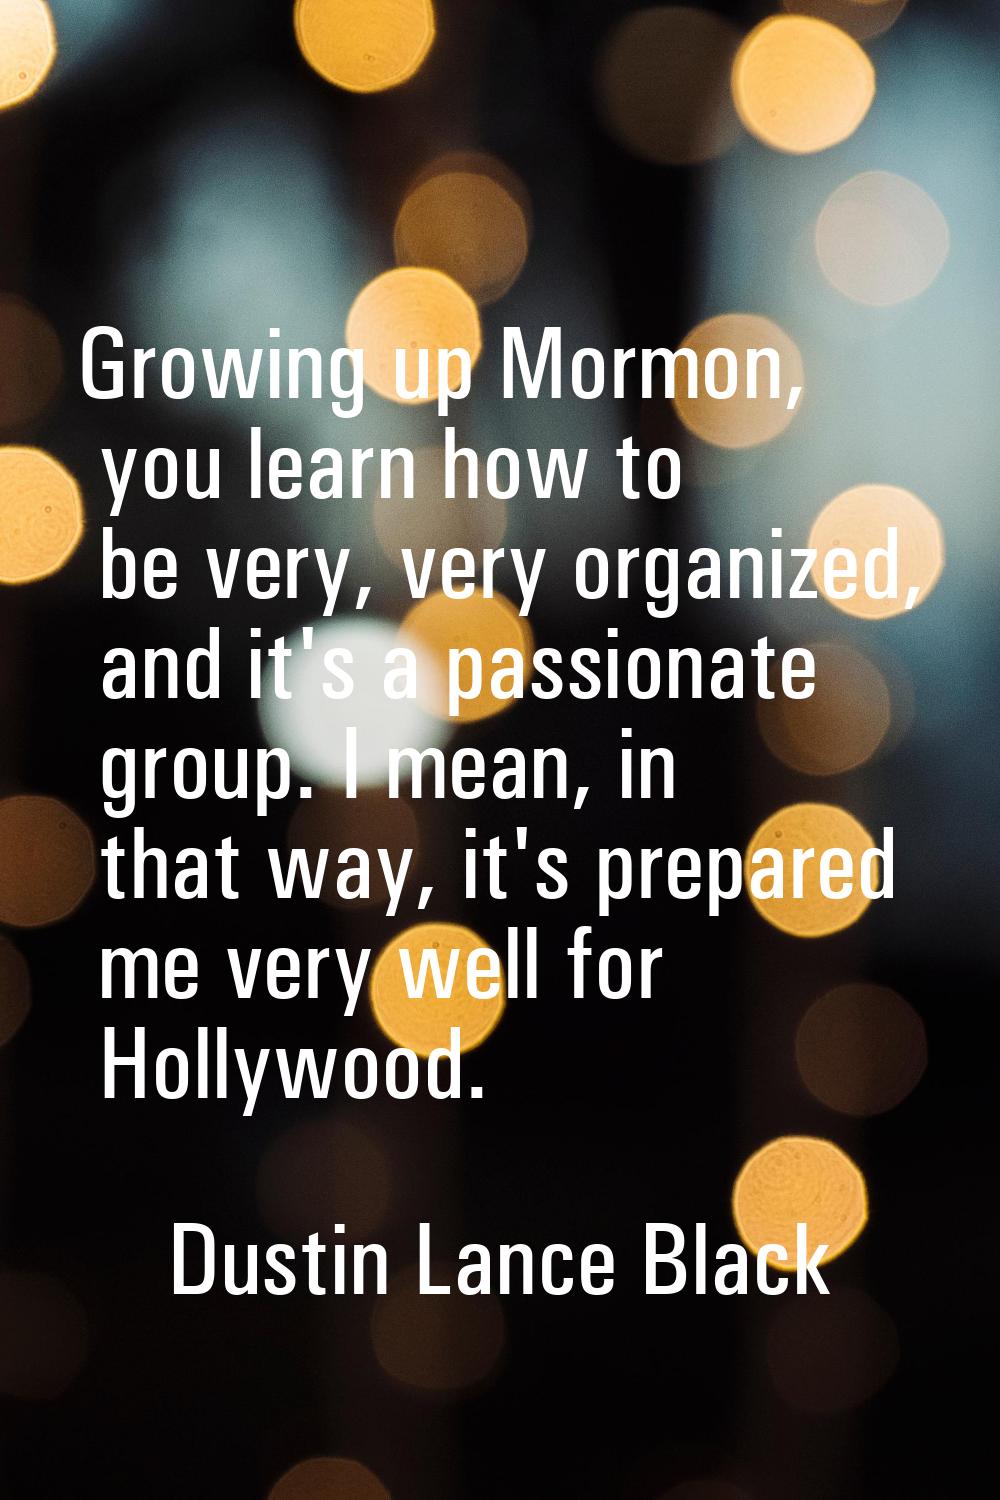 Growing up Mormon, you learn how to be very, very organized, and it's a passionate group. I mean, i